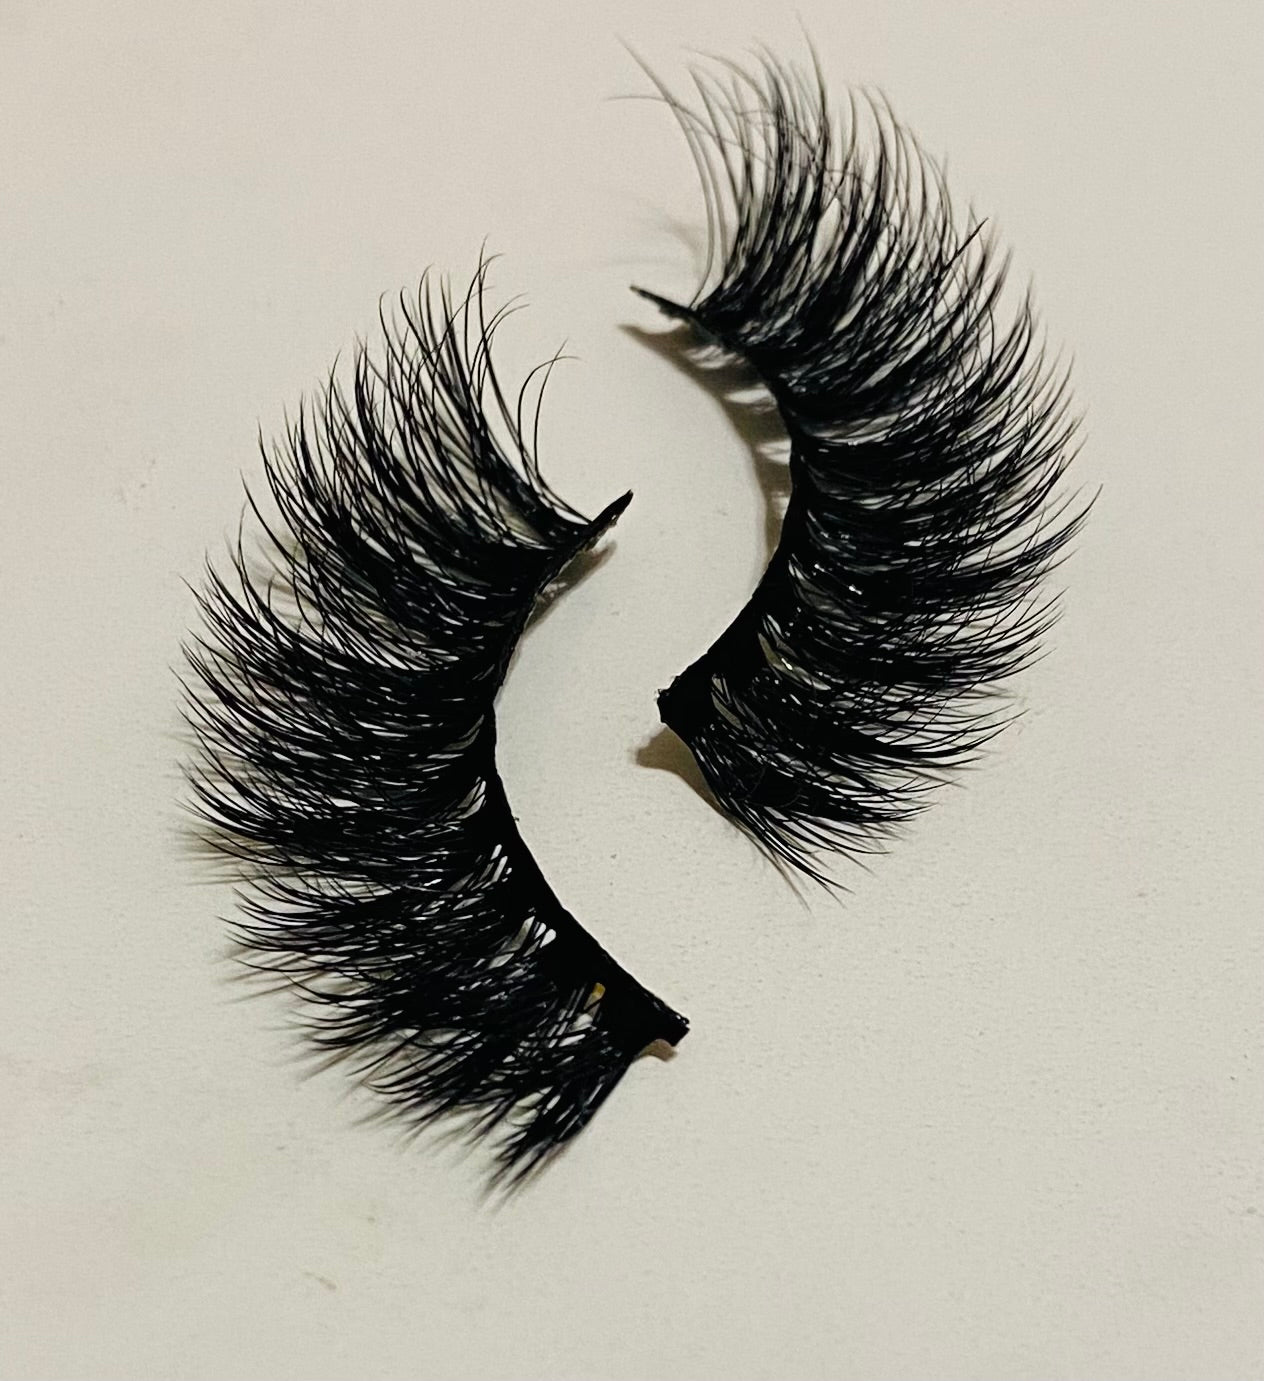 25mm Dramatic Lash Bundle!With Three Free Gifts.